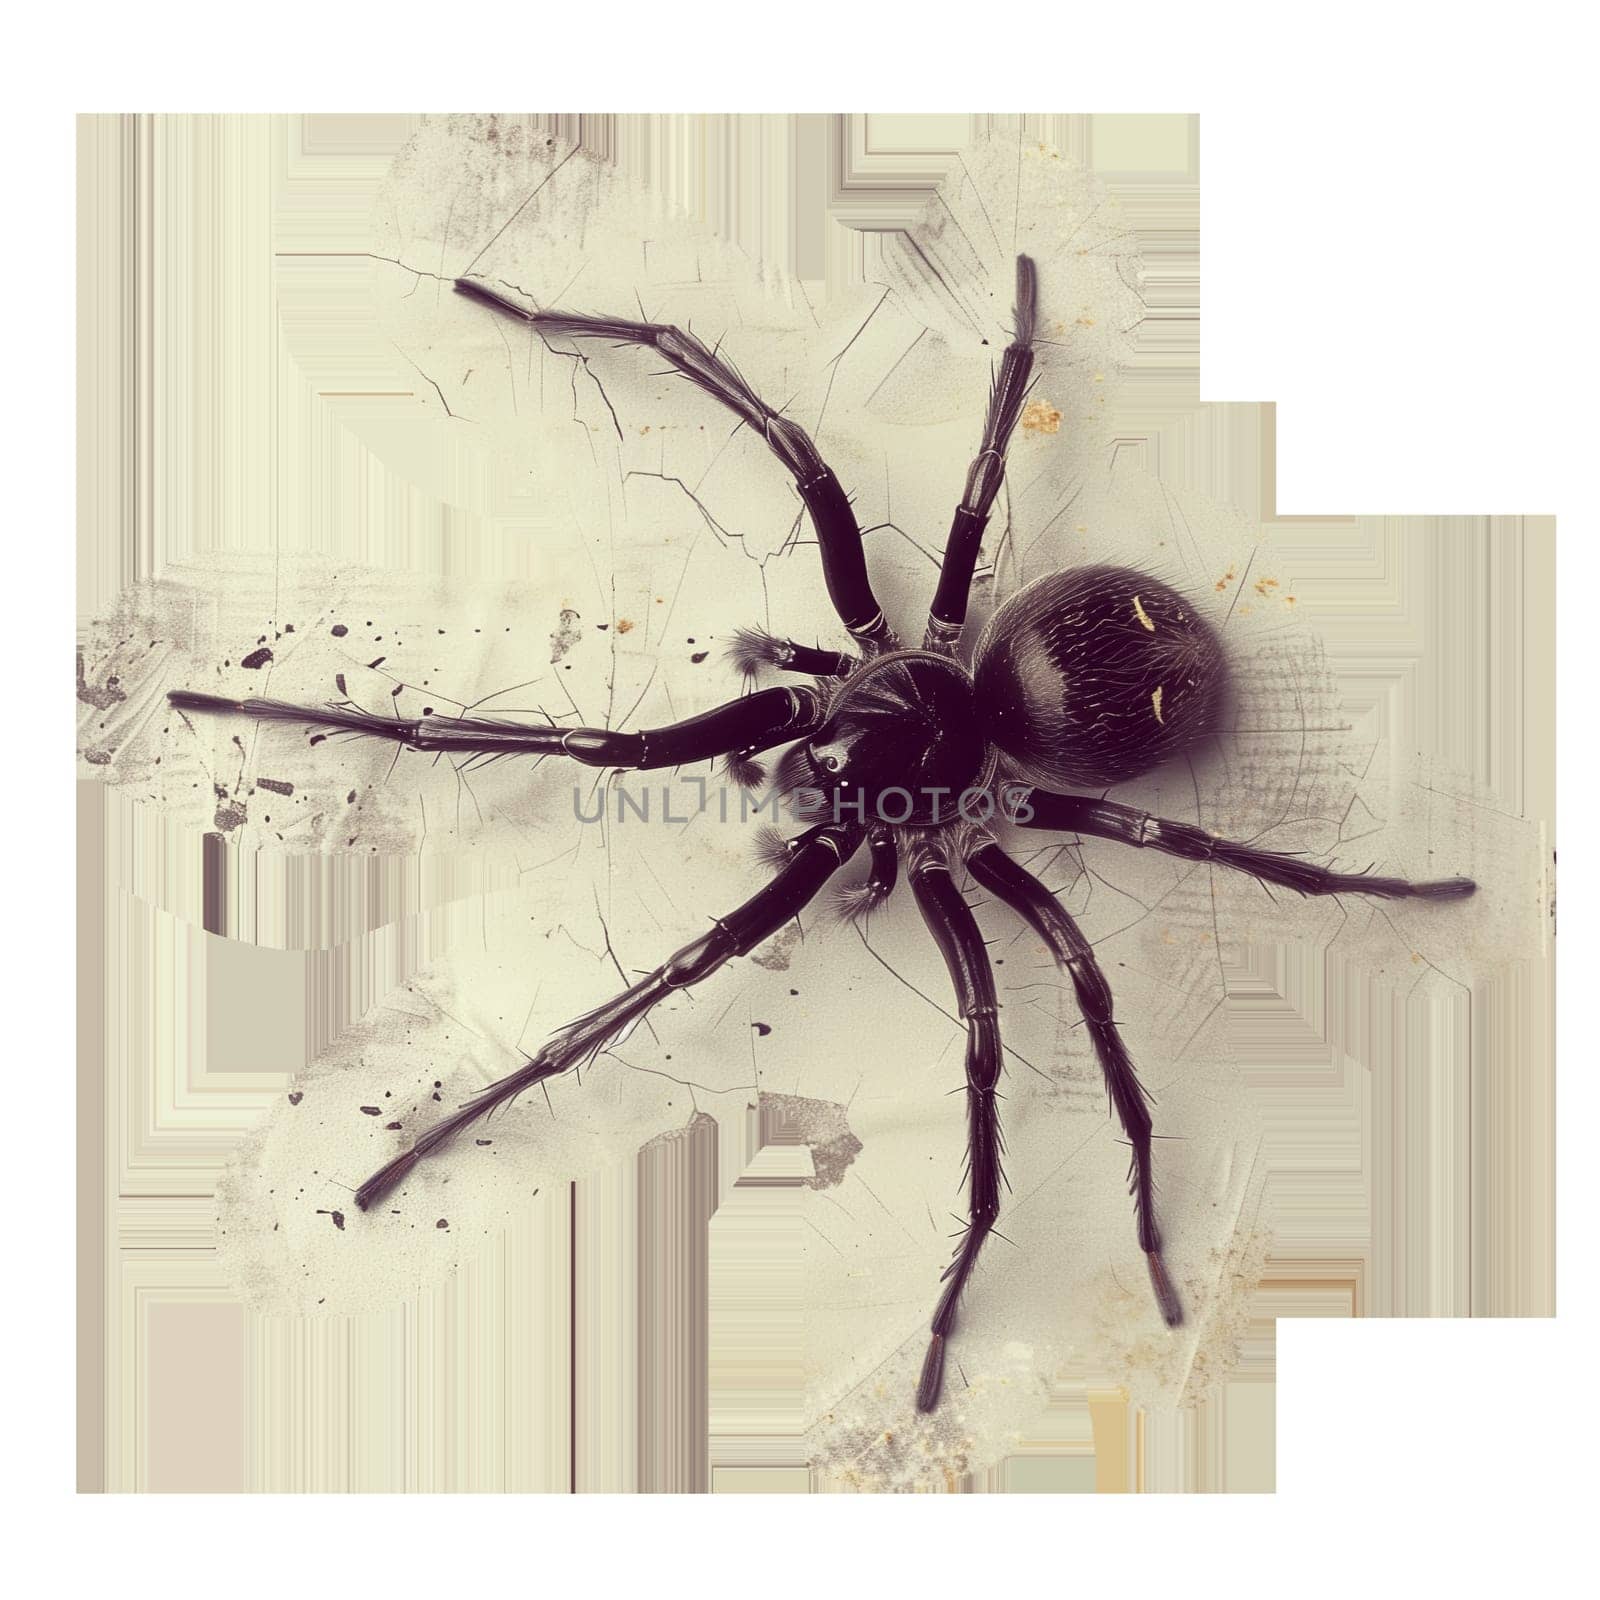 Cut out faded photo of halloween spider by Dustick